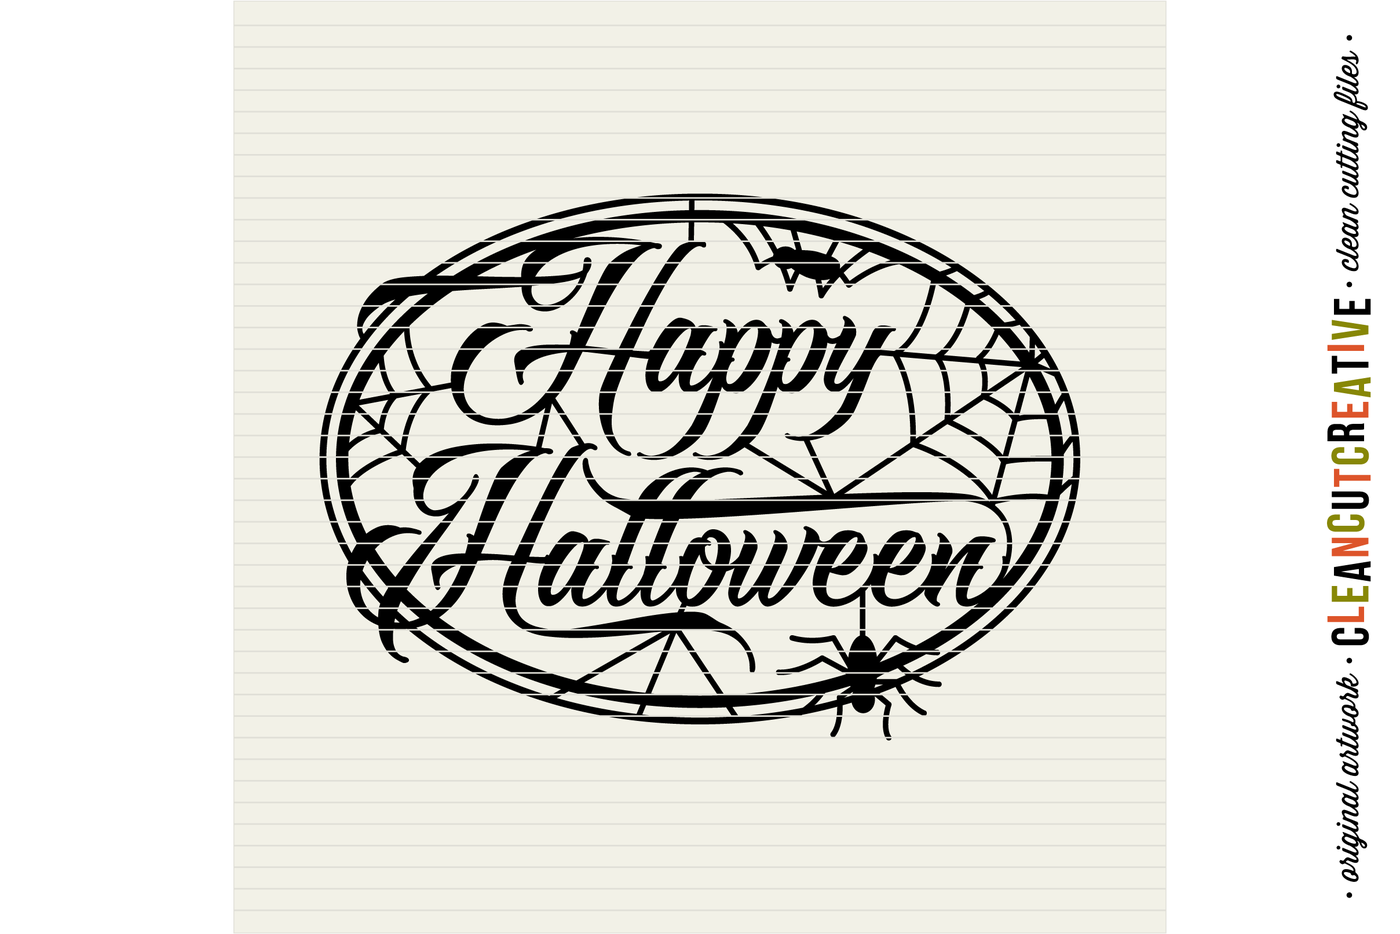 Svg Happy Halloween Svg Trick Or Treat Svg Halloween Svg Spider Cob Web Svg Svg Dxf Eps Png Cricut Silhouette Clean Cutting Files By Cleancutcreative Thehungryjpeg Com